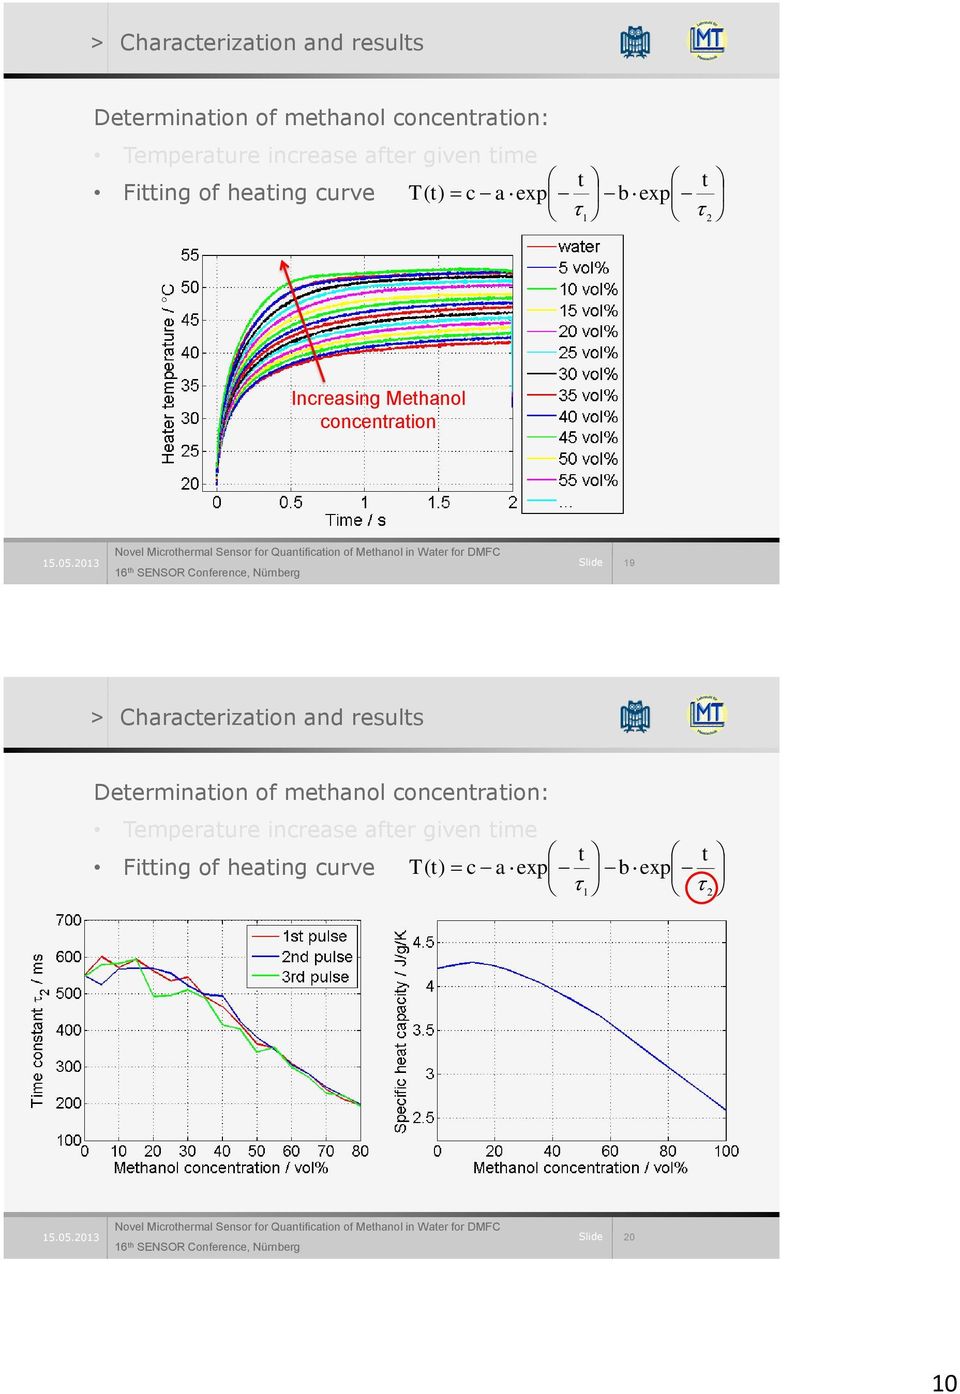 2013 Novel Microthermal Sensor for Quantification of Methanol in Water for DMFC 16 th SENSOR Conference, Nürnberg 19 > Characterization and results